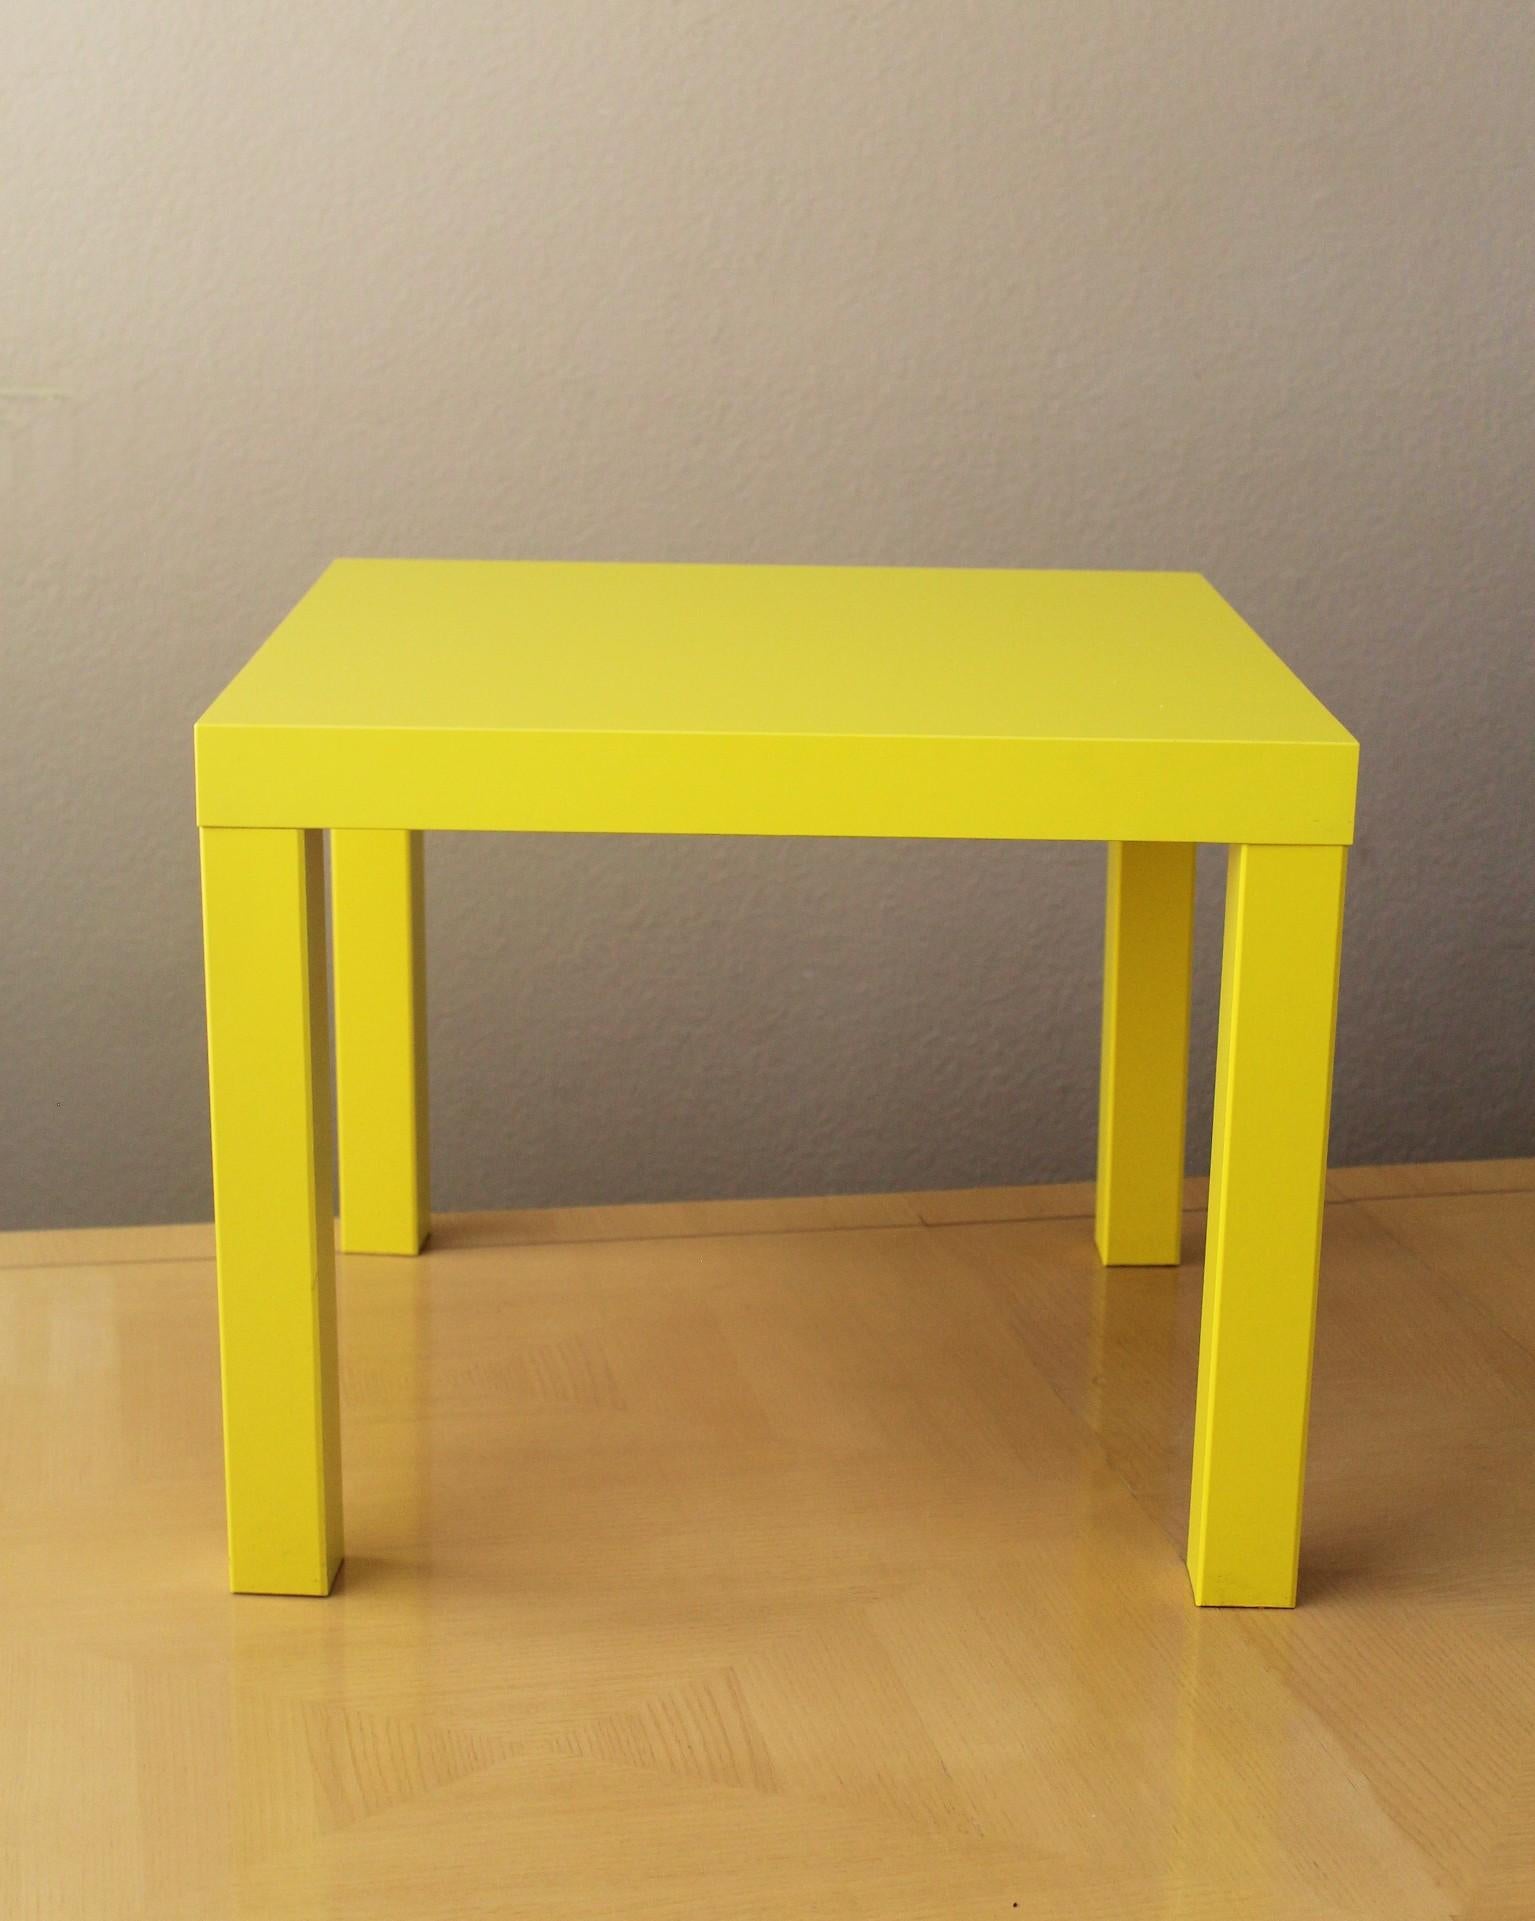 Rare!

Ikea LACK
End Tables

Made in Poland
1999

Coveted Discontinued Yellow Color!

Here are a quarter century old pair of First Year 1999 Ikea LACK tables in the coveted YELLOW color. These tables are a post-modern tour de force and liven up any